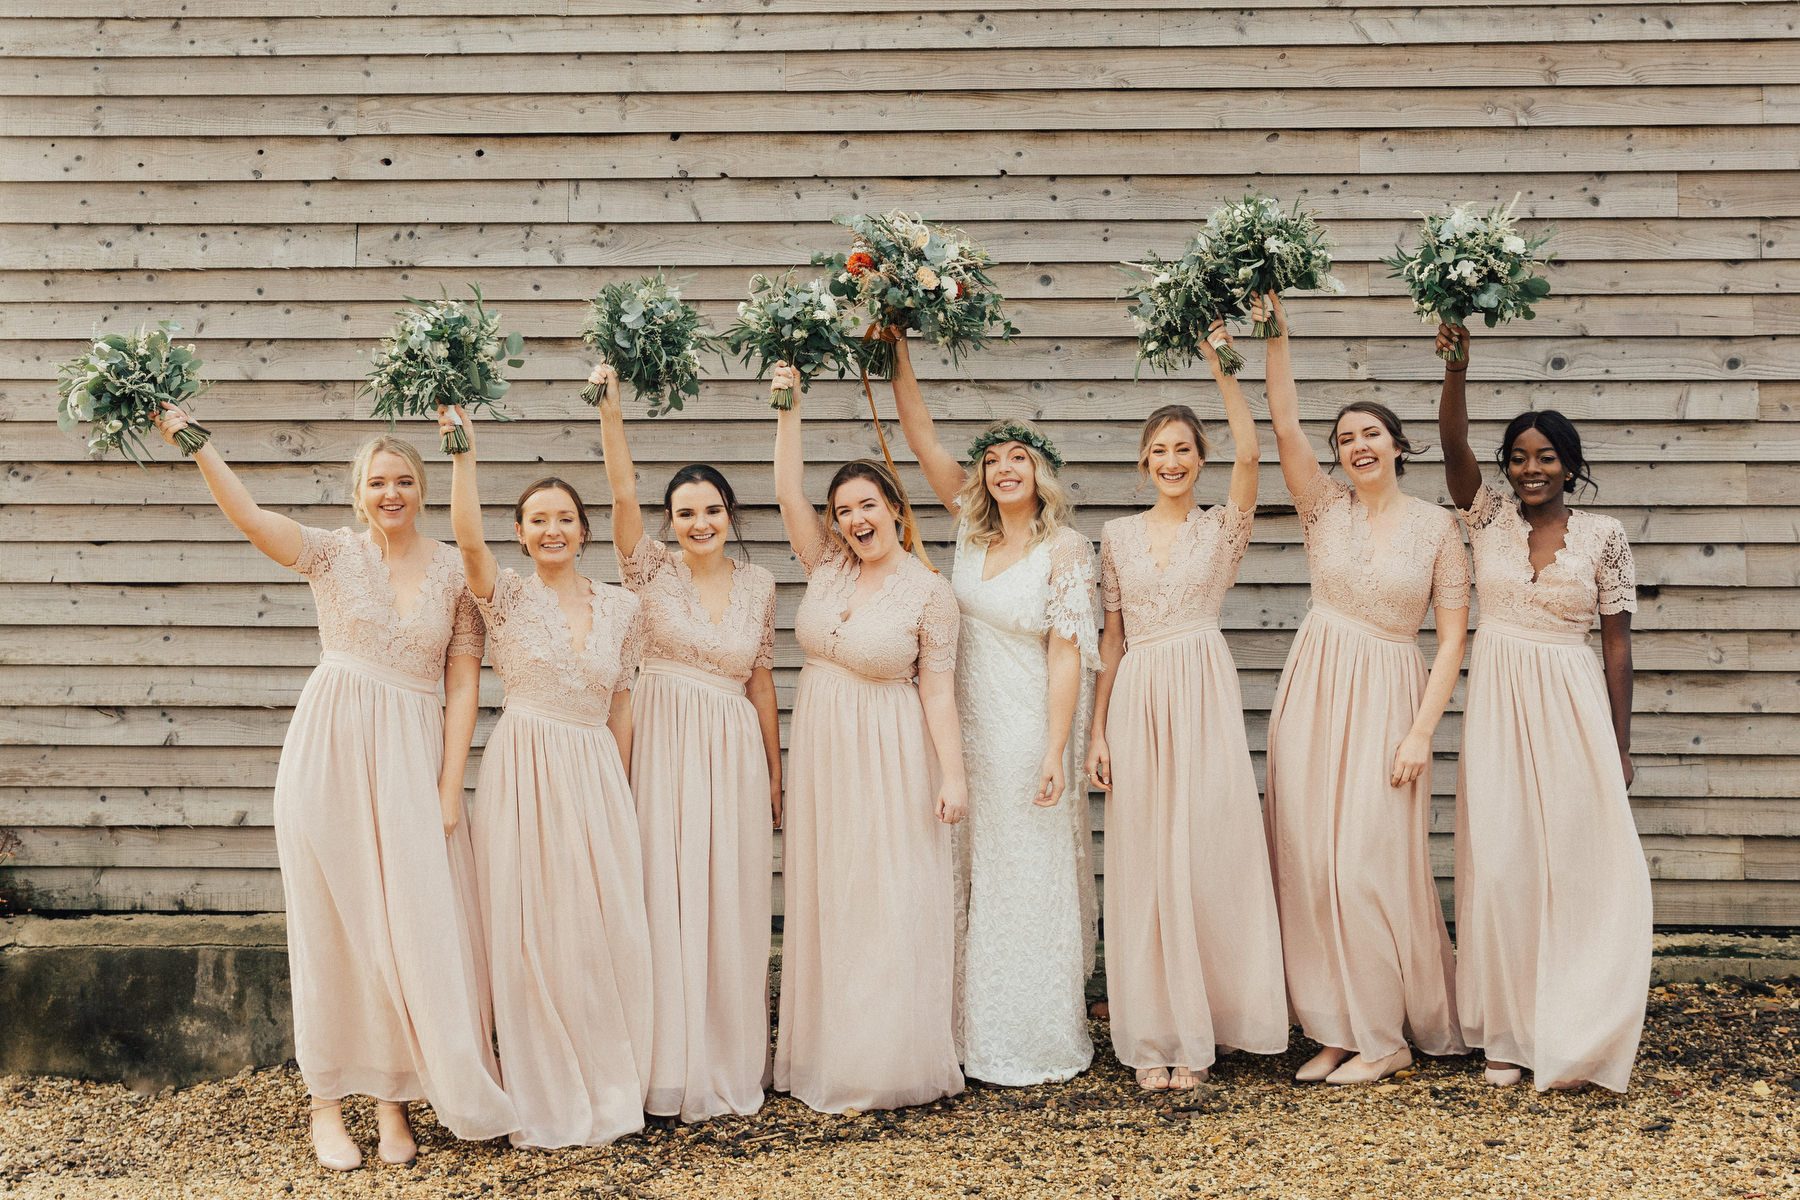 The bridesmaids were wearign matching blush maxi dresses with lace bodices